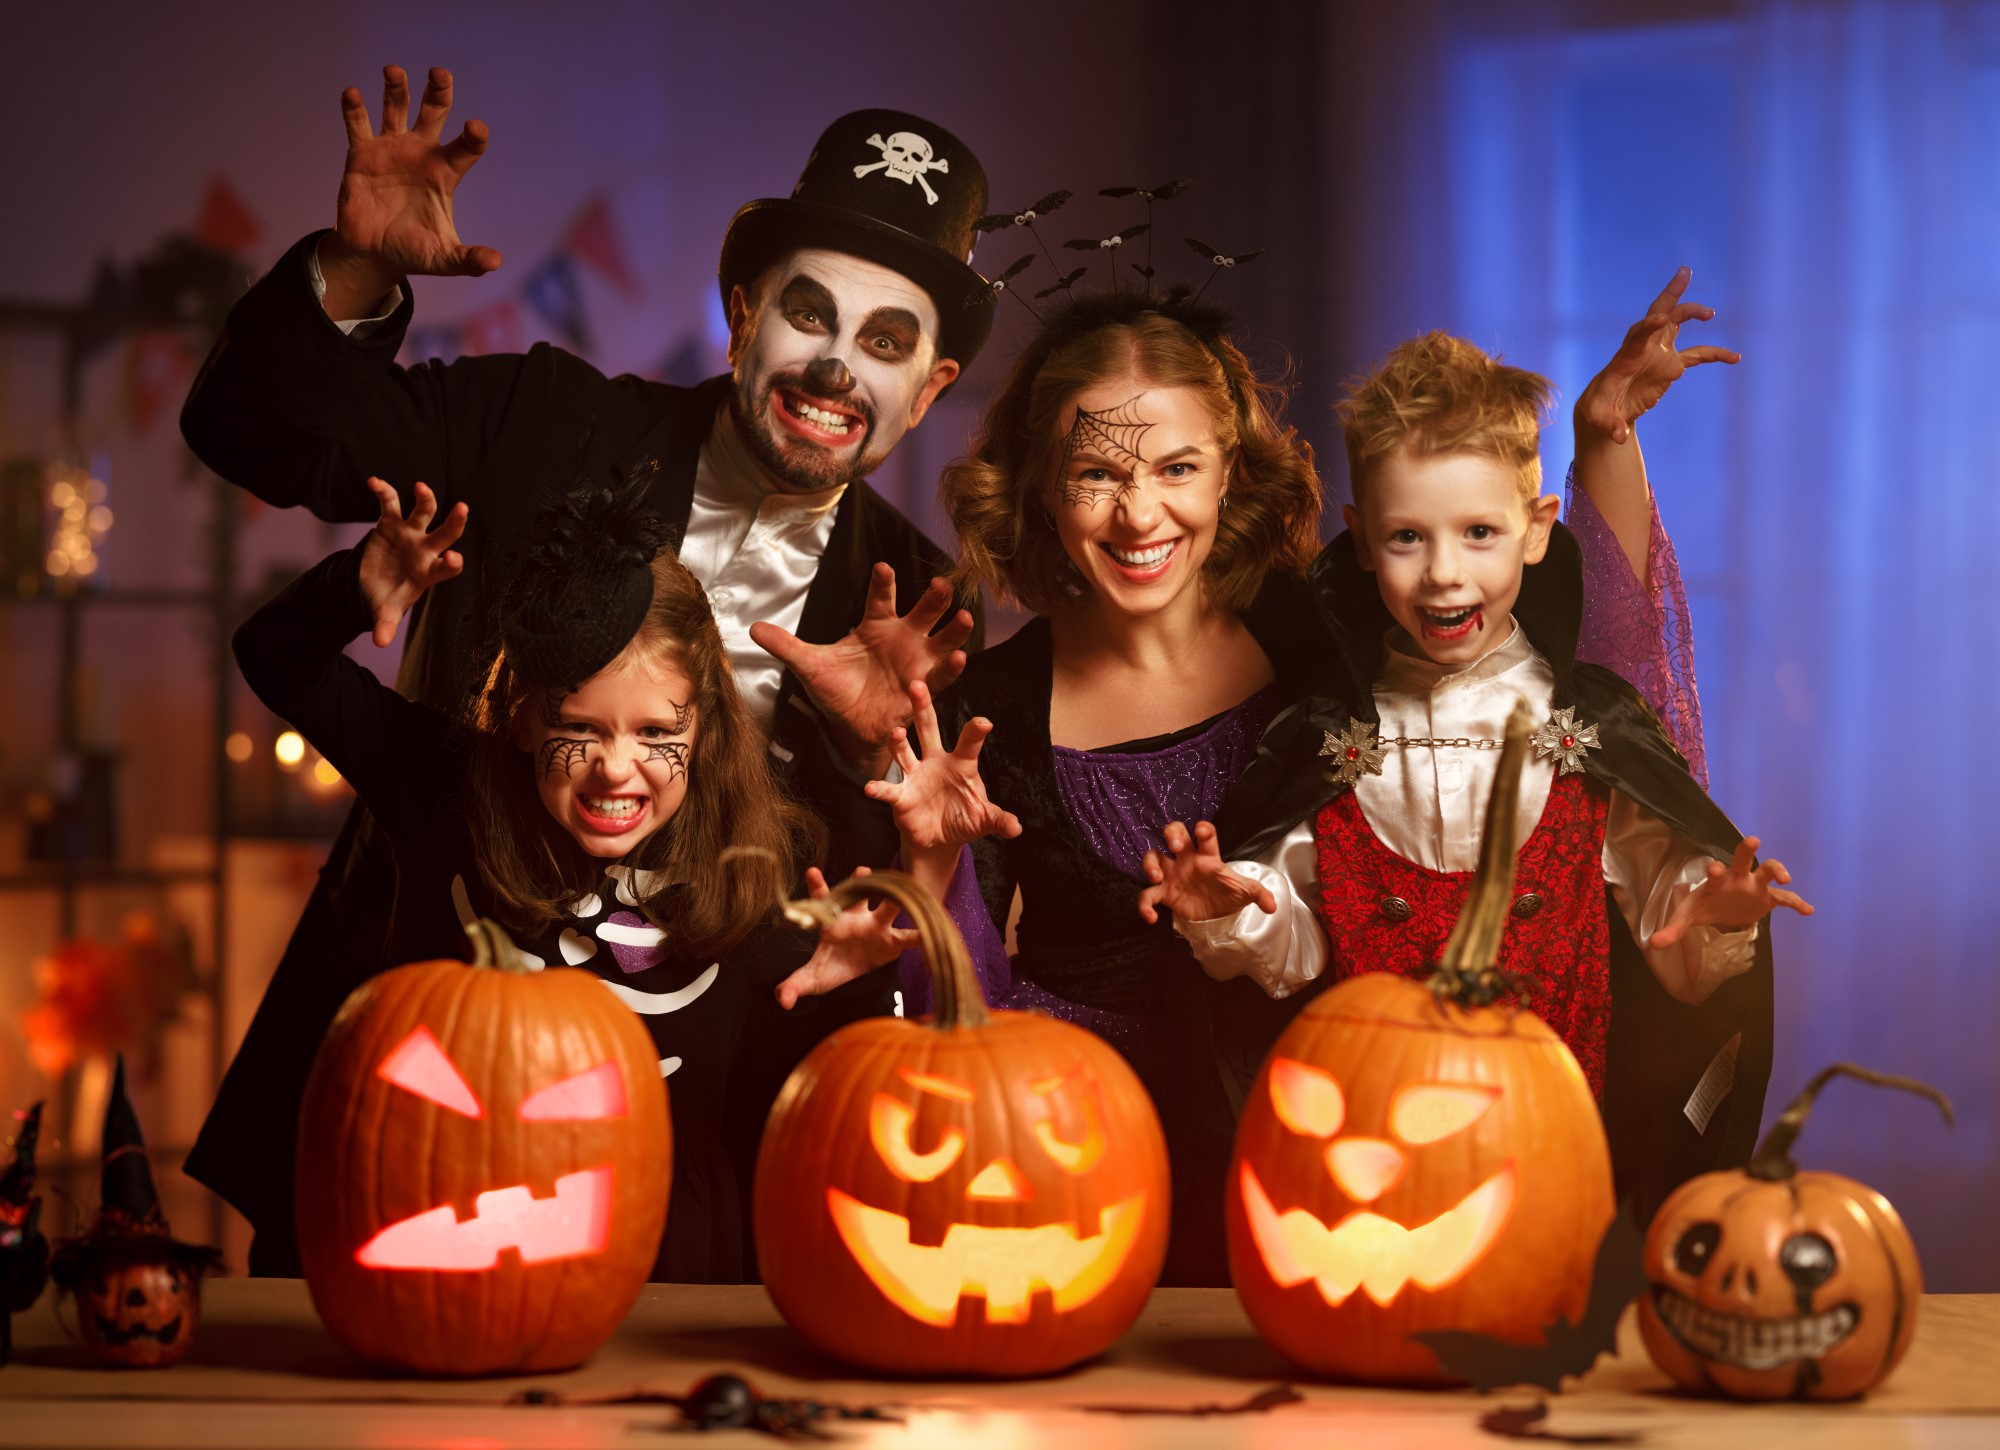 Halloween History and Traditions